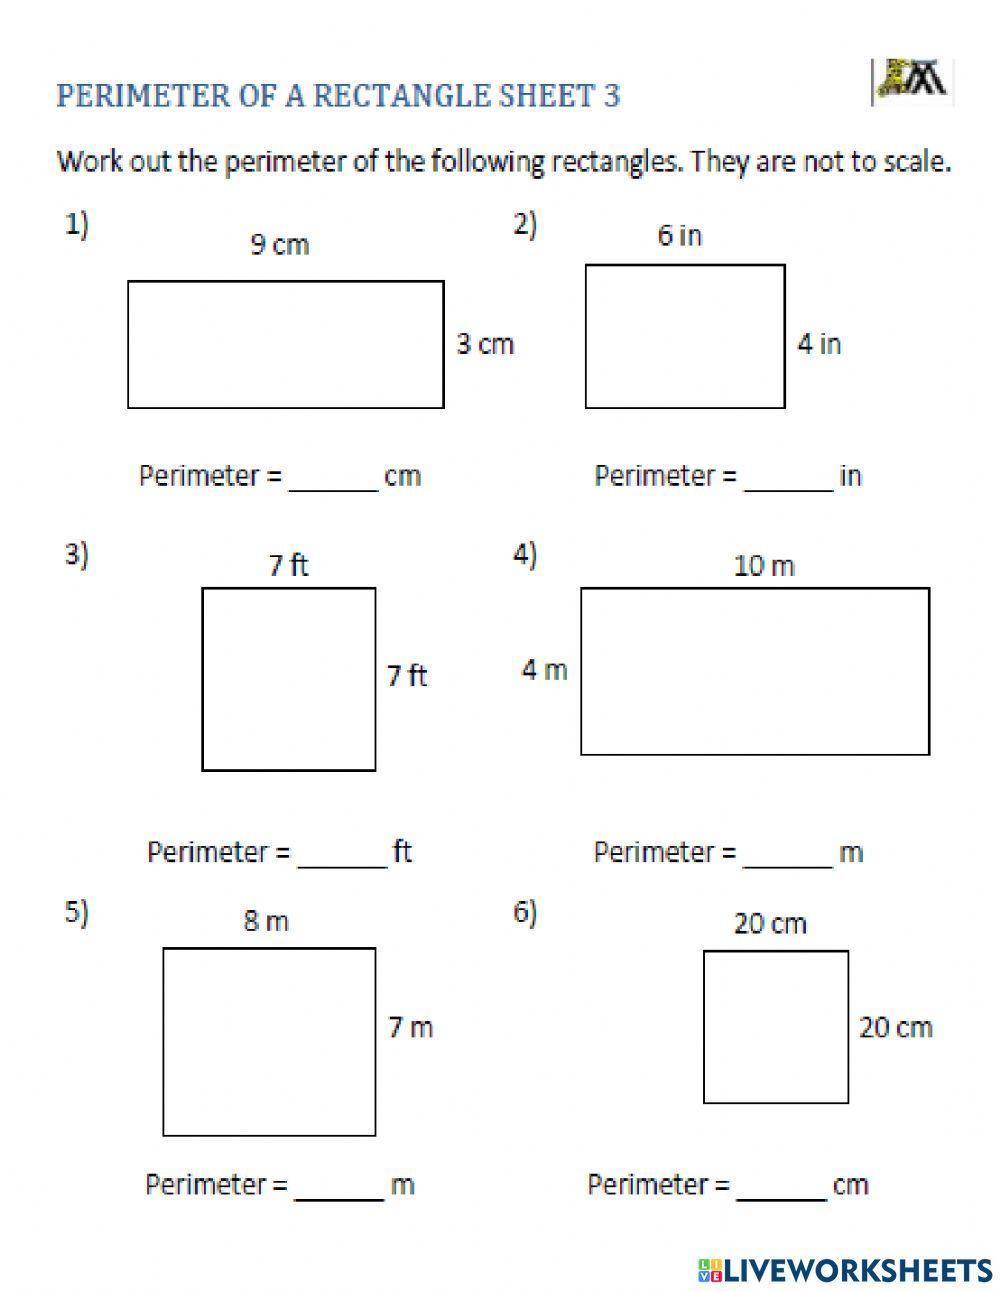 Find the perimeter of a rectangle